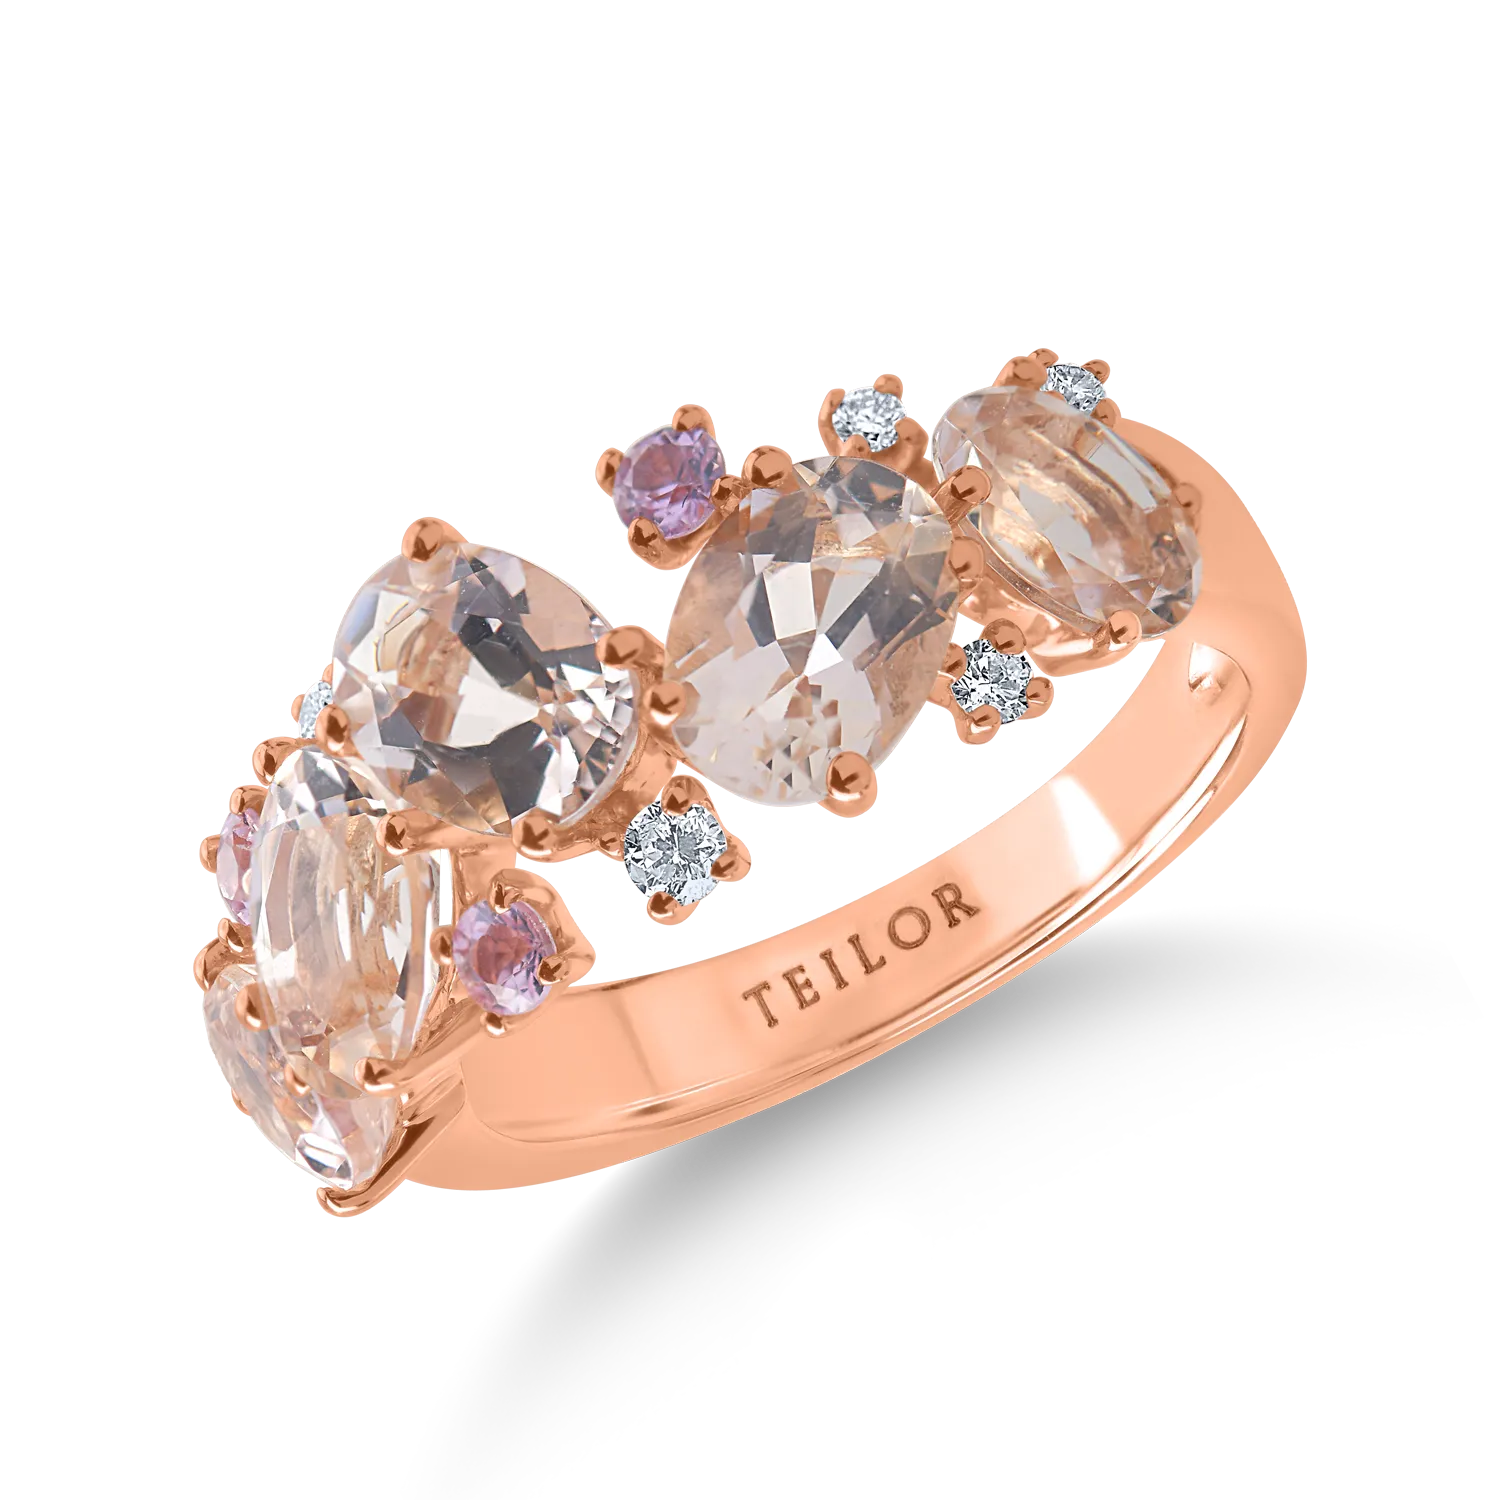 Rose gold ring with 3.3ct precious and semi-precious stones